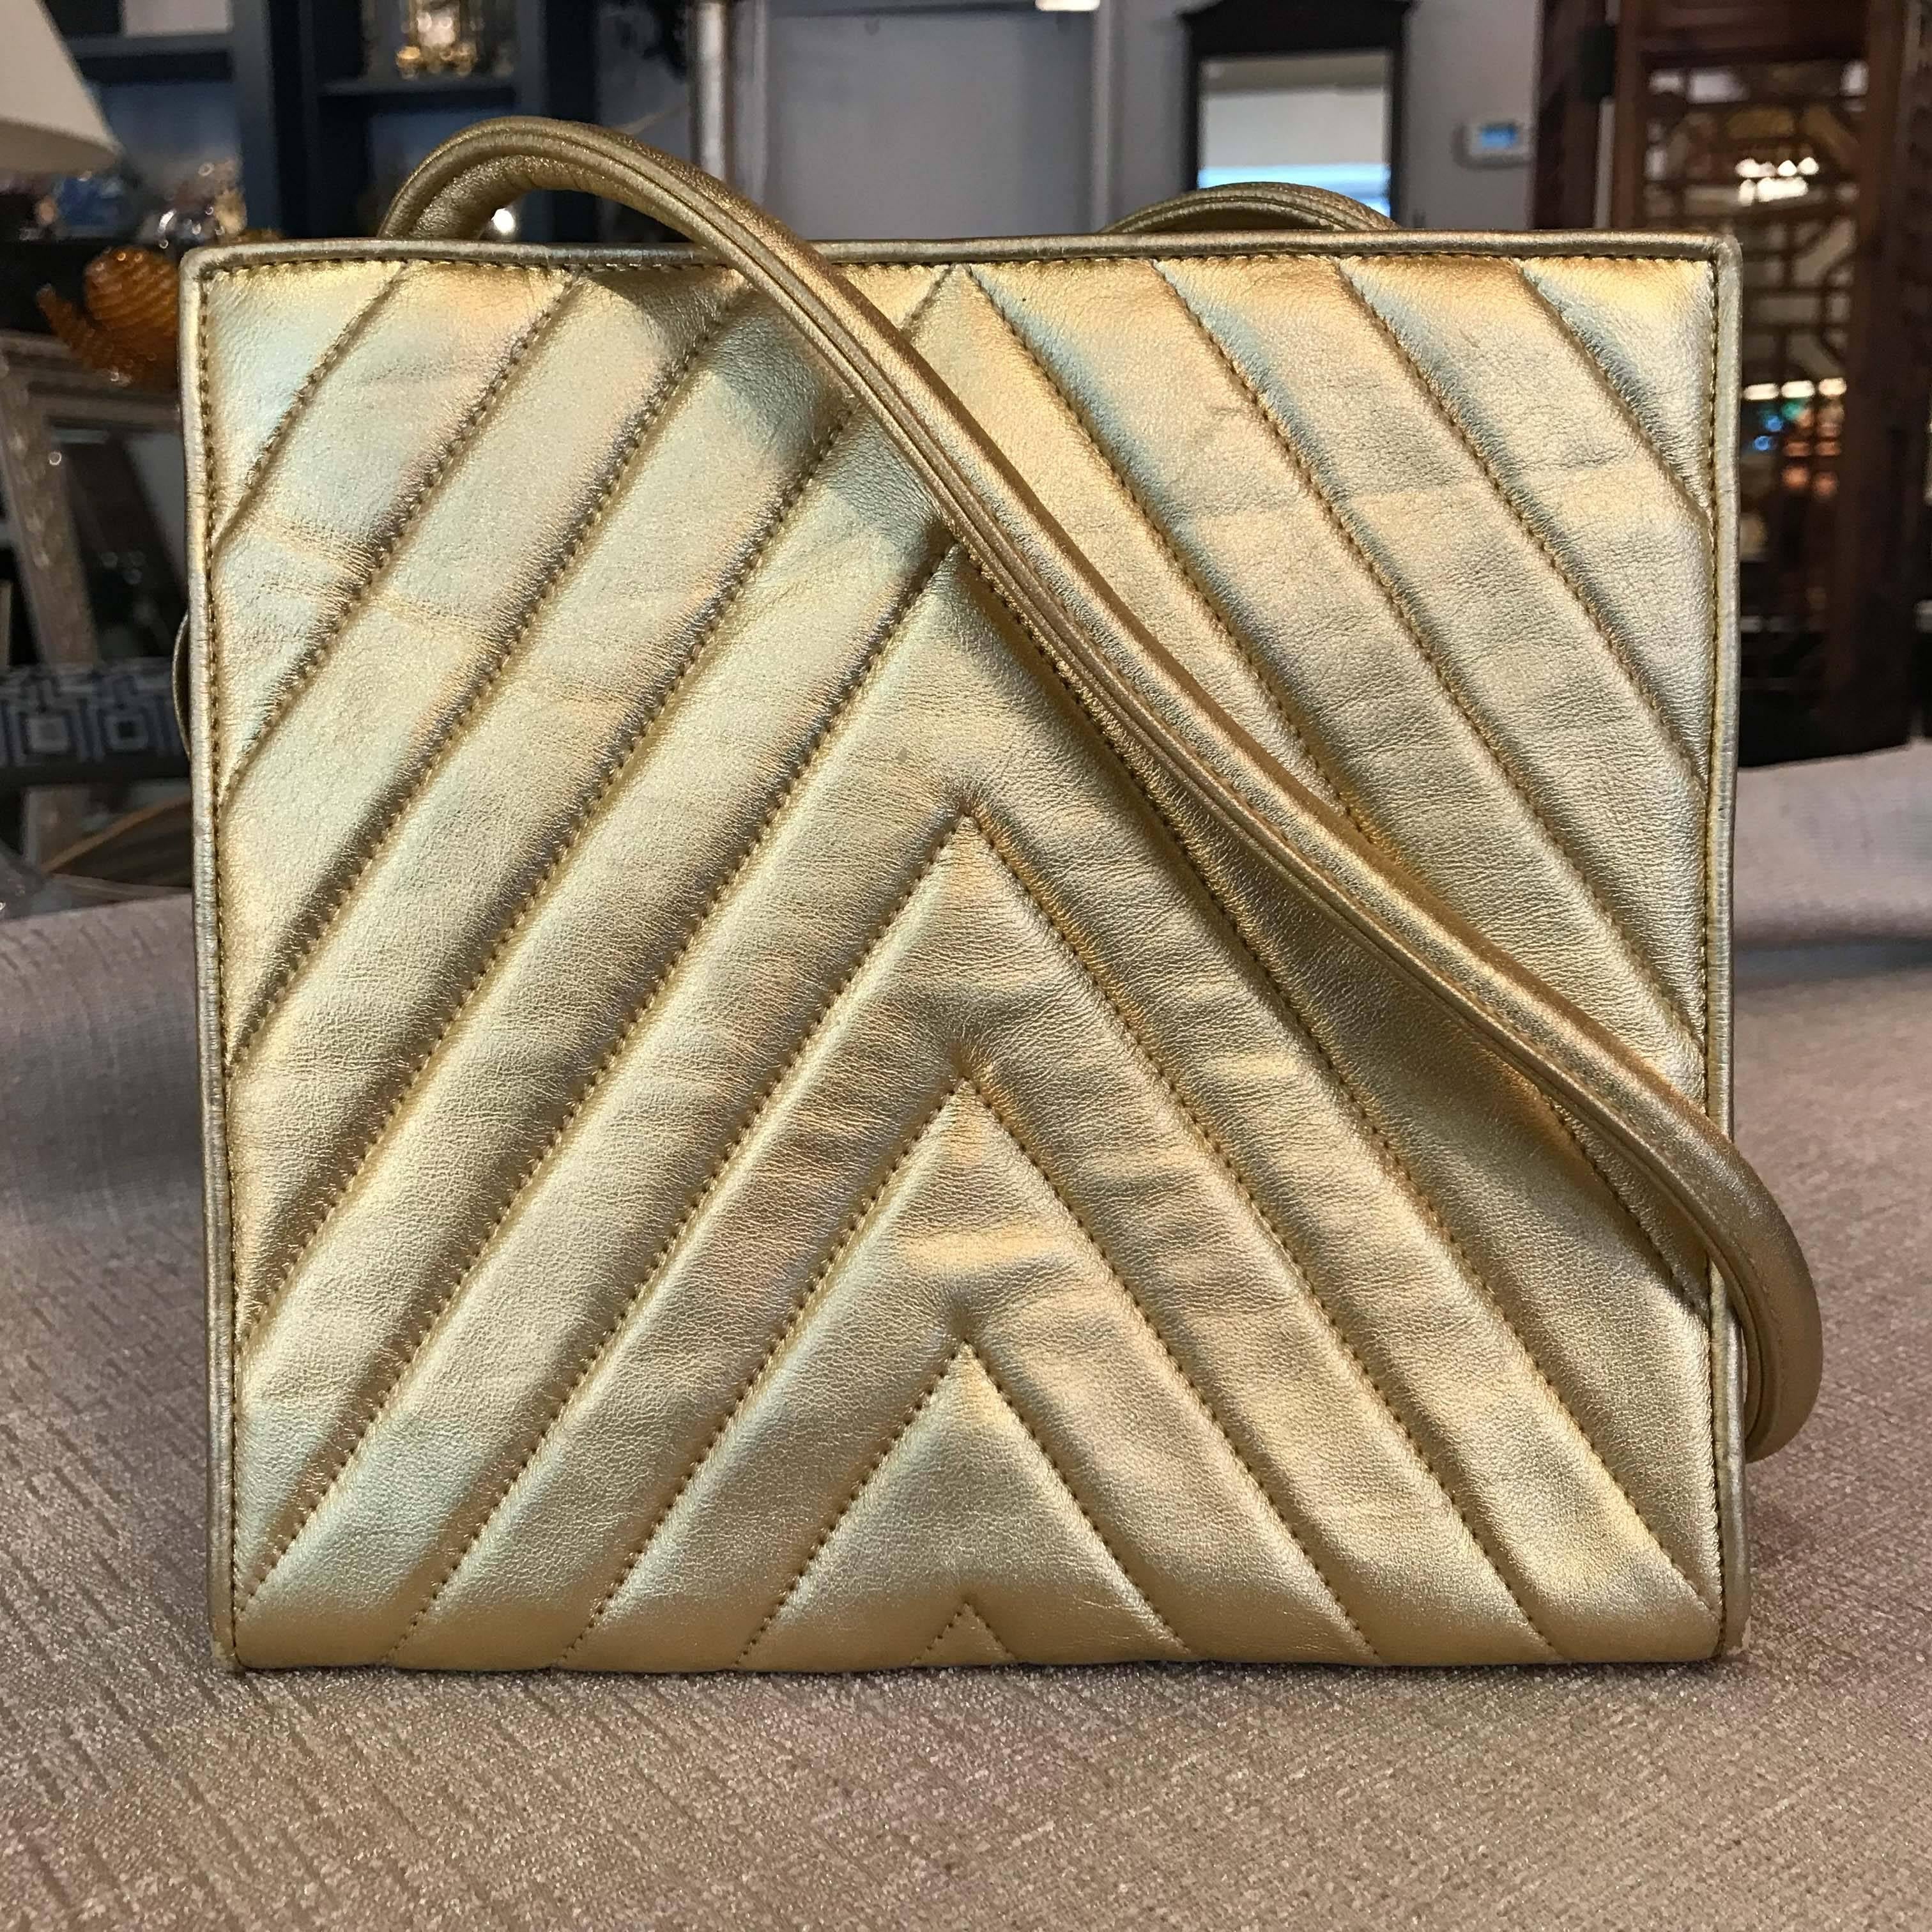 A rare gold vintage lambskin Chanel bag with rolled leather strap.